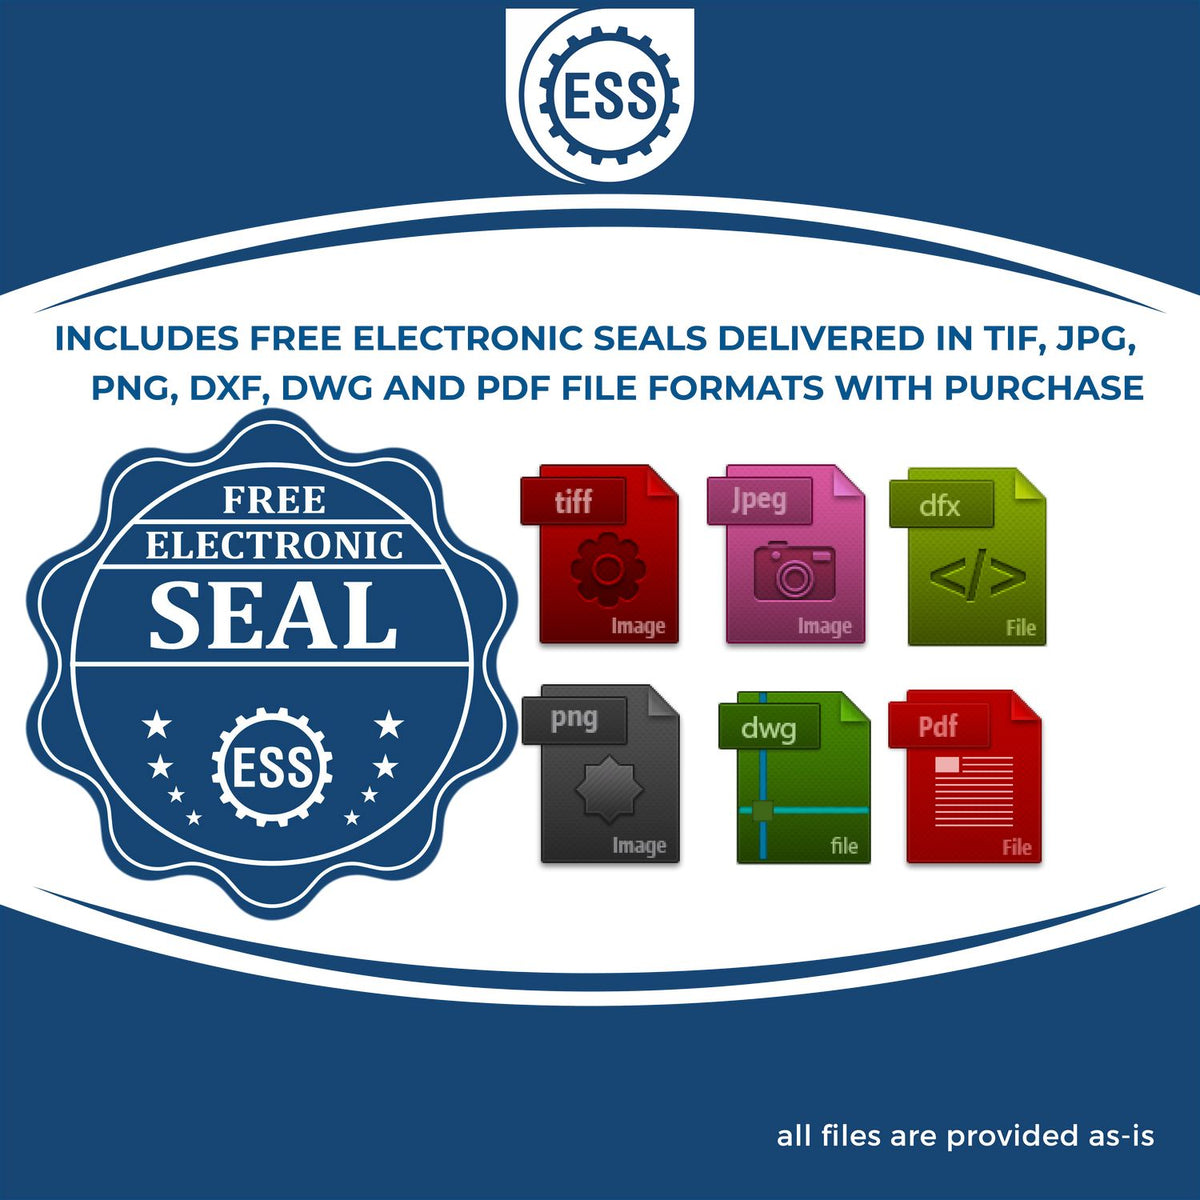 An infographic for the free electronic seal for the Slim Pre-Inked Kansas Landscape Architect Seal Stamp illustrating the different file type icons such as DXF, DWG, TIF, JPG and PNG.